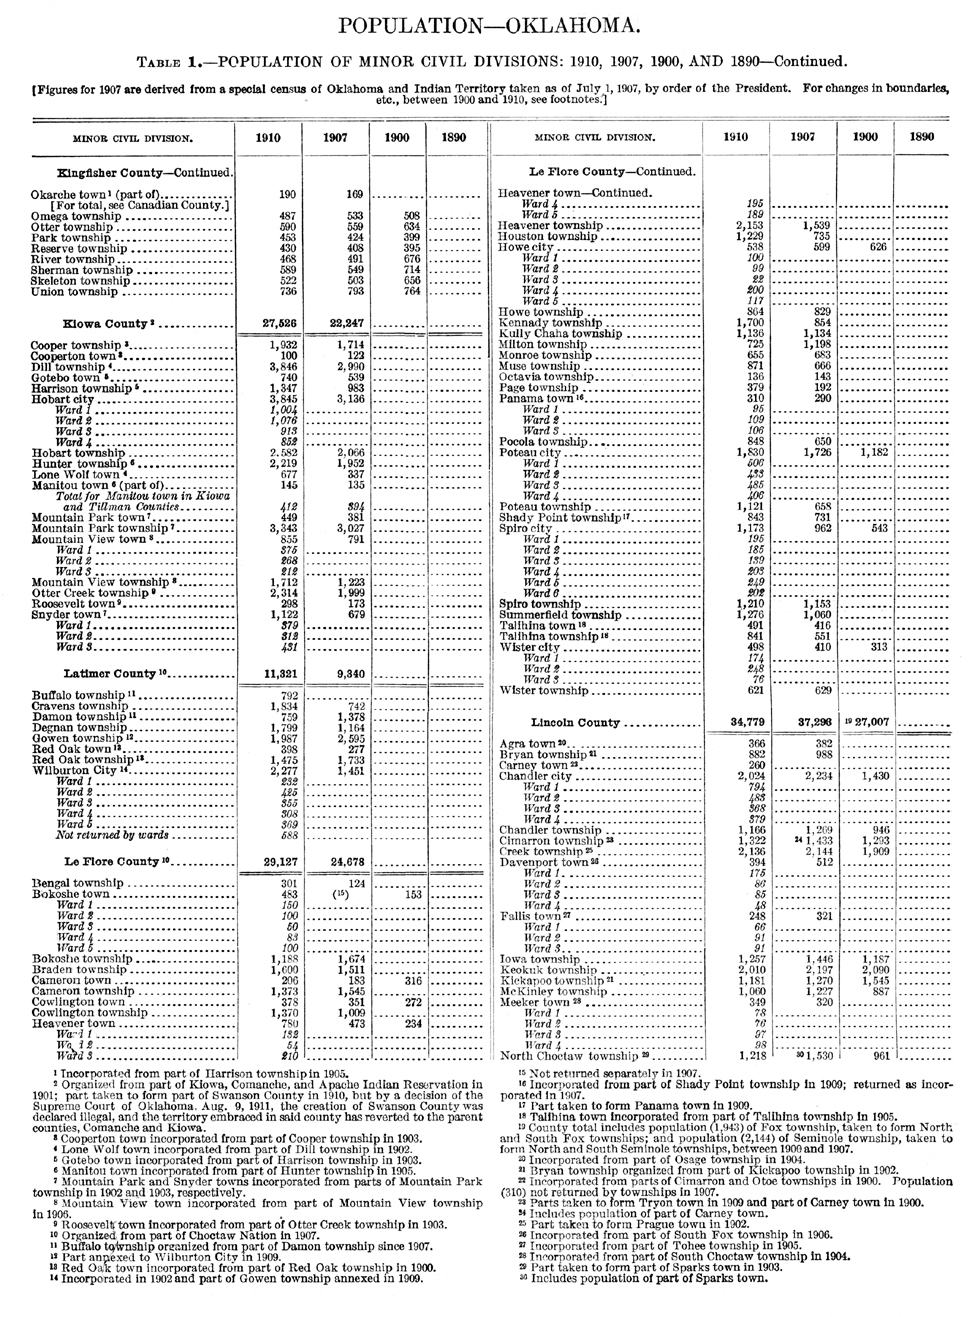 1910 Oklahoma Census, Chapter 1, Table 1, Page 8